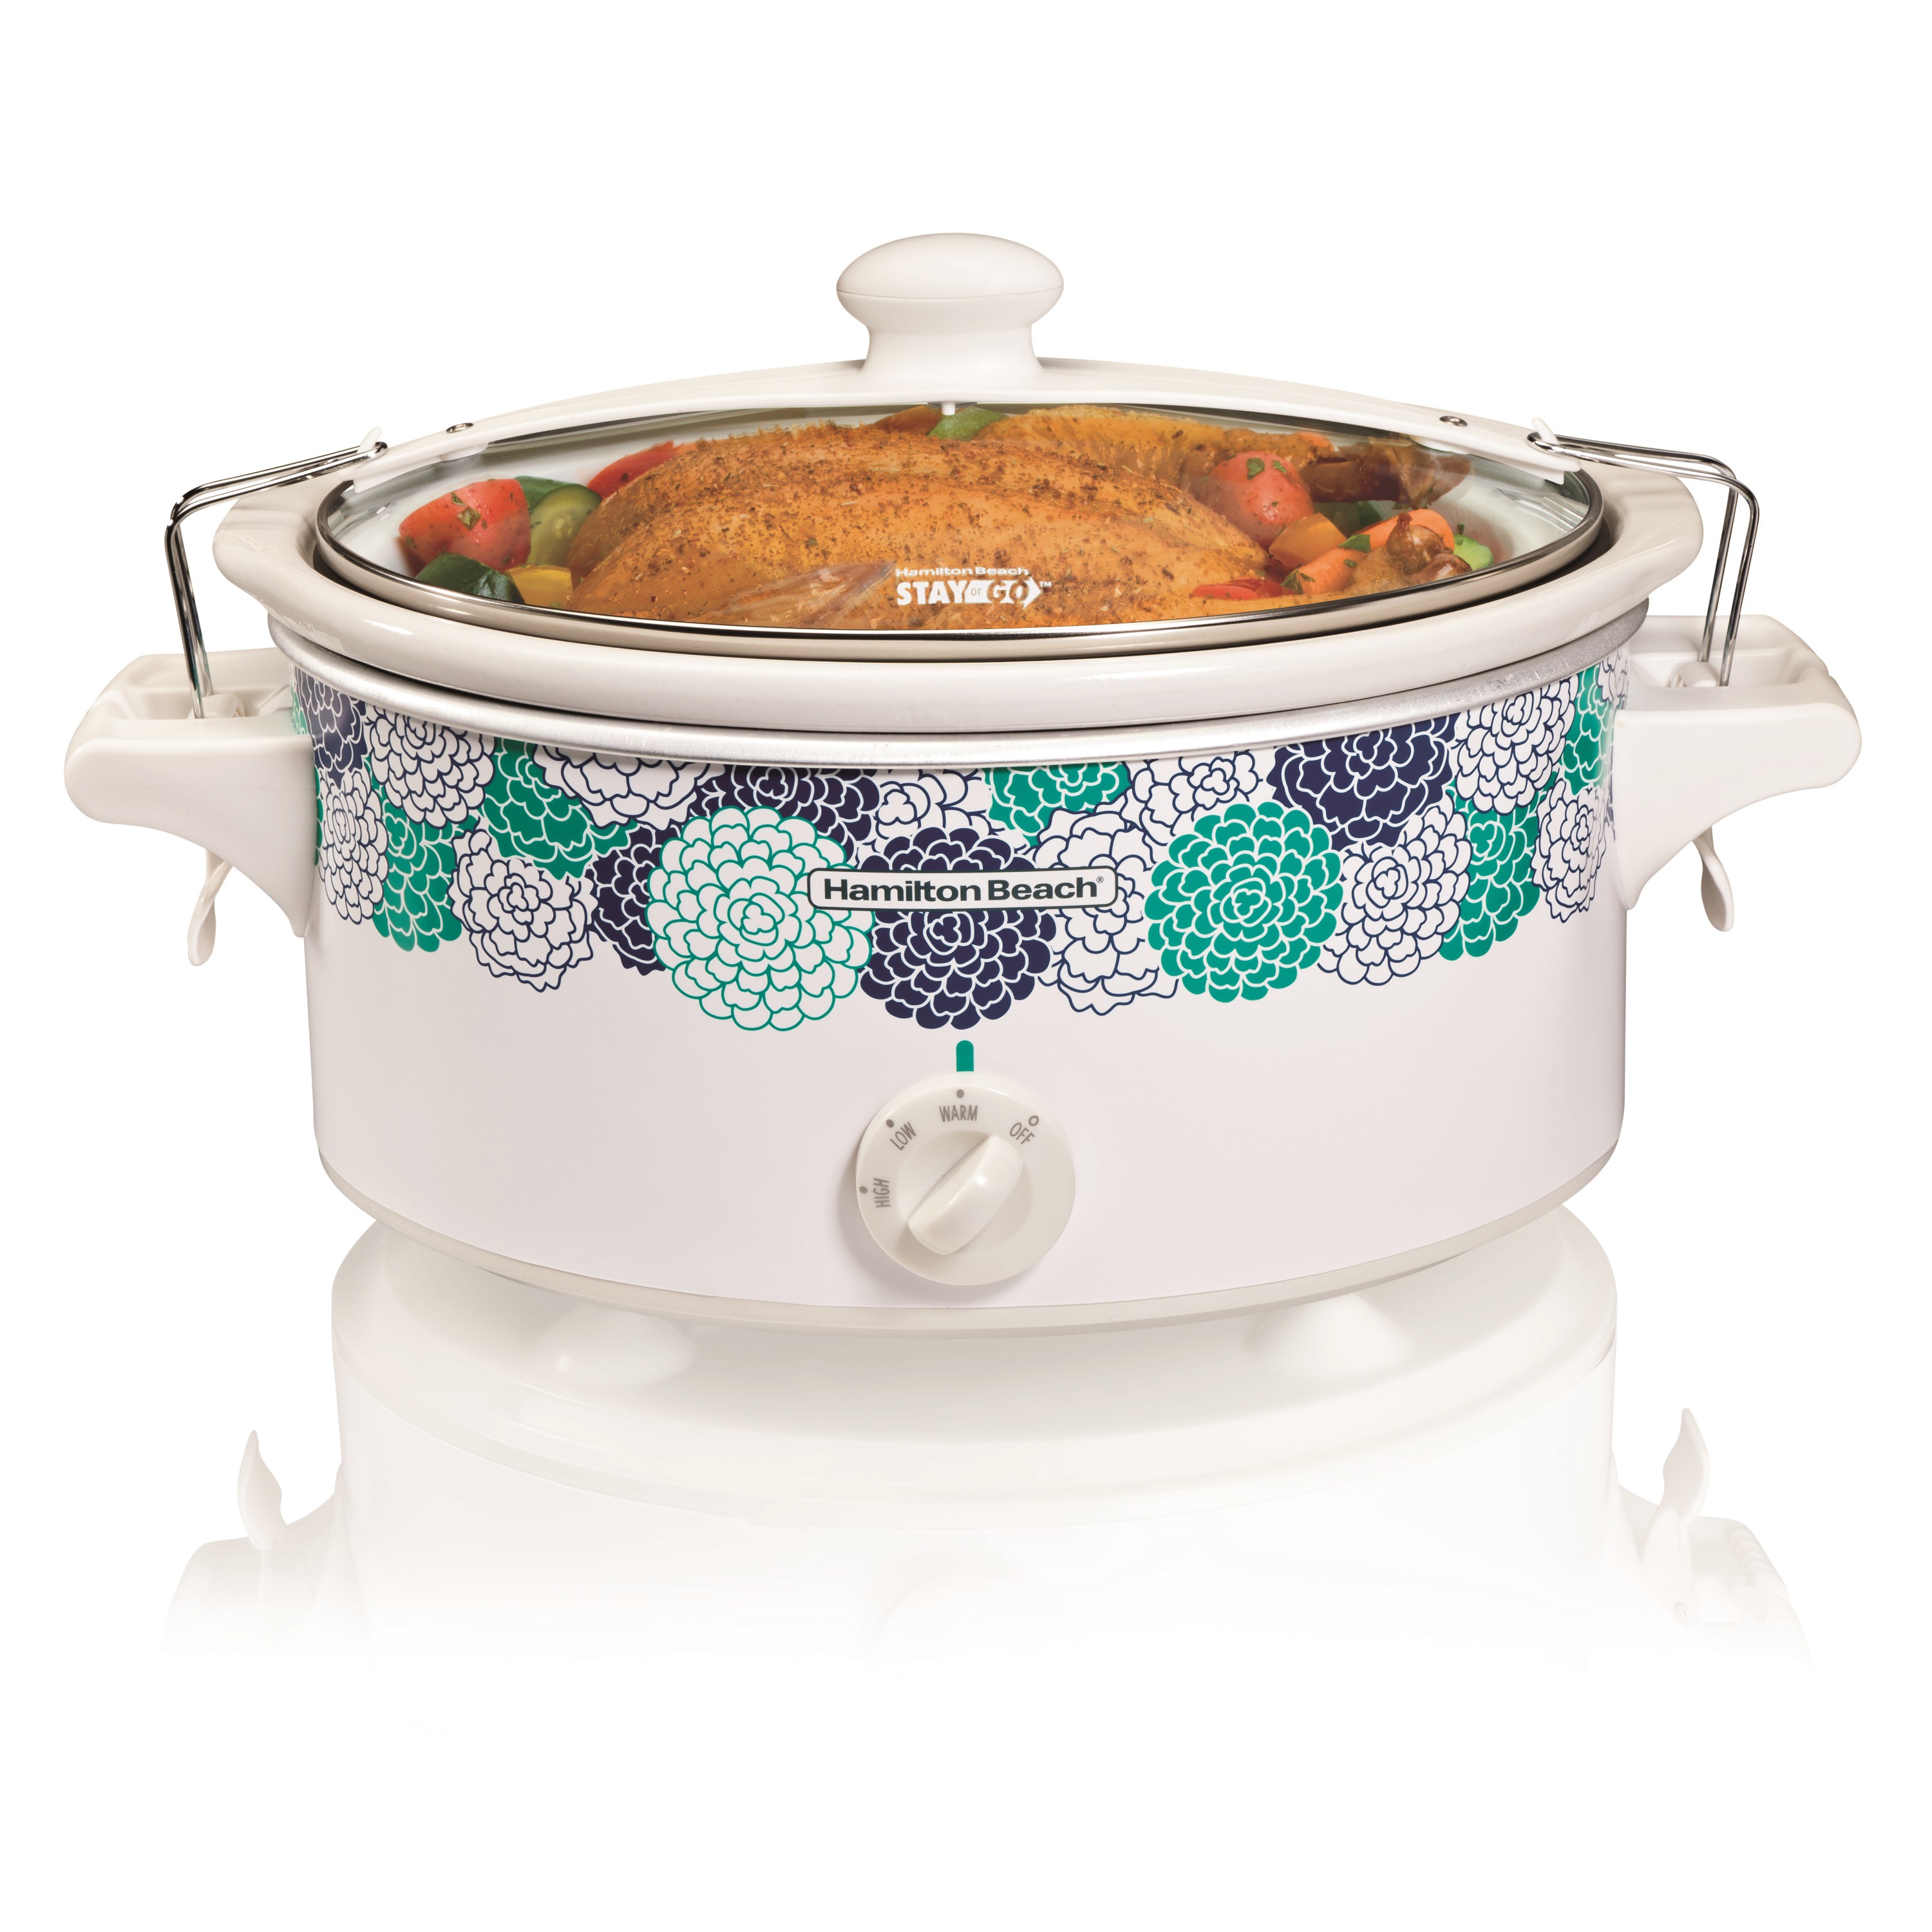 https://ak1.ostkcdn.com/images/products/8250942/STAY-OR-GO-6QUART-OVAL-SLOW-APPLCOOKER-WITH-LID-CLIPS-GASKET-fd22aeda-aa43-42d3-88ed-f717e2859b51.jpg